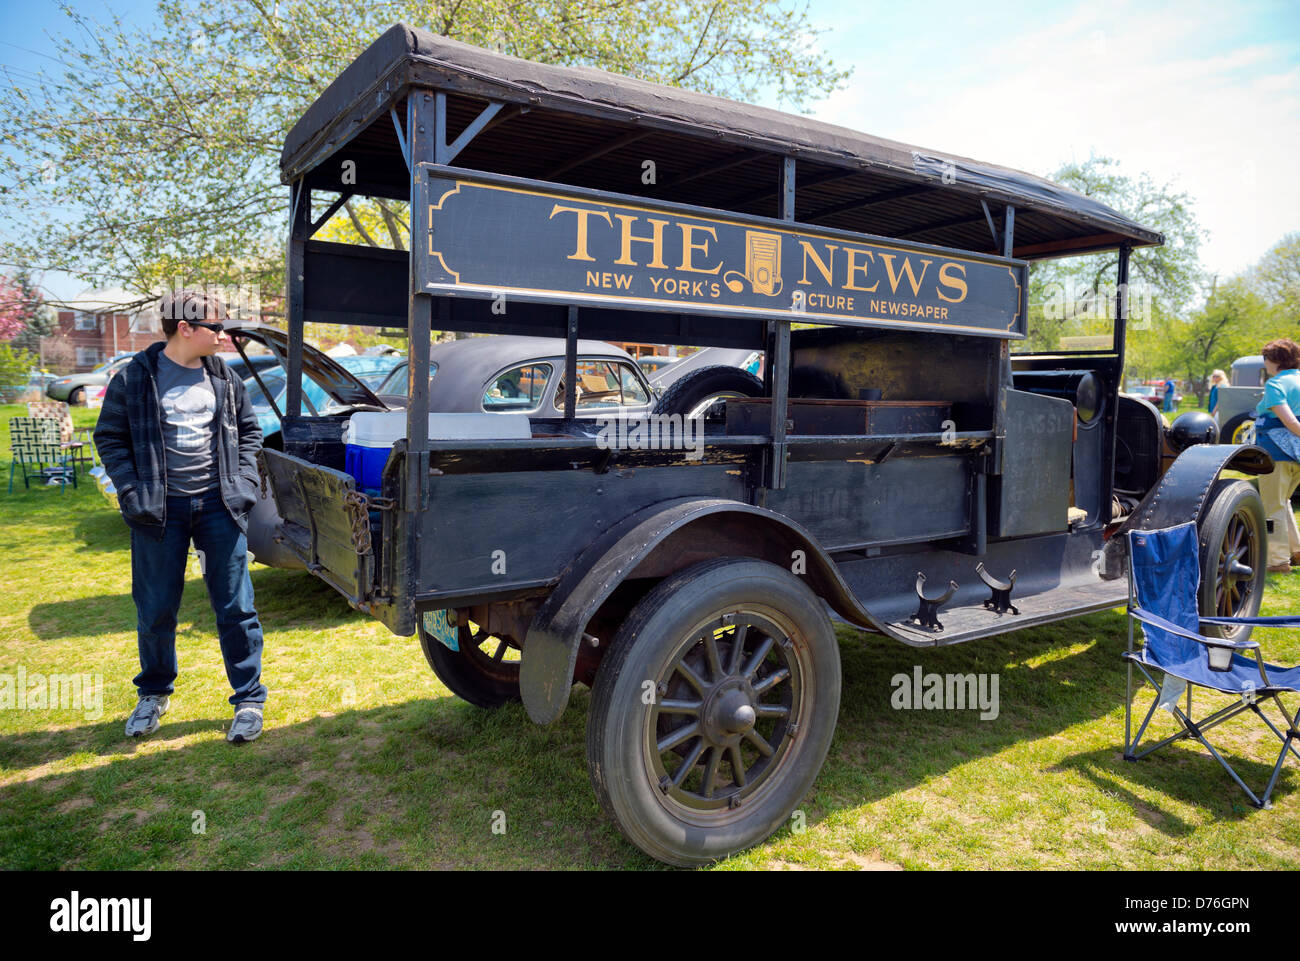 Floral Park, New York, U.S. April 28, 2013. This wood, black 1922 REO Speed Wagon Canopy Express Model F, which used to deliver THE NEWS  'New York's Picture Newspaper',' painted on its sides, is at the Antique Auto Show, where New York Antique Auto Club members exhibited their cars on the farmhouse grounds of Queens County Farm Museum. Credit: Ann E Parry/Alamy Live News Stock Photo